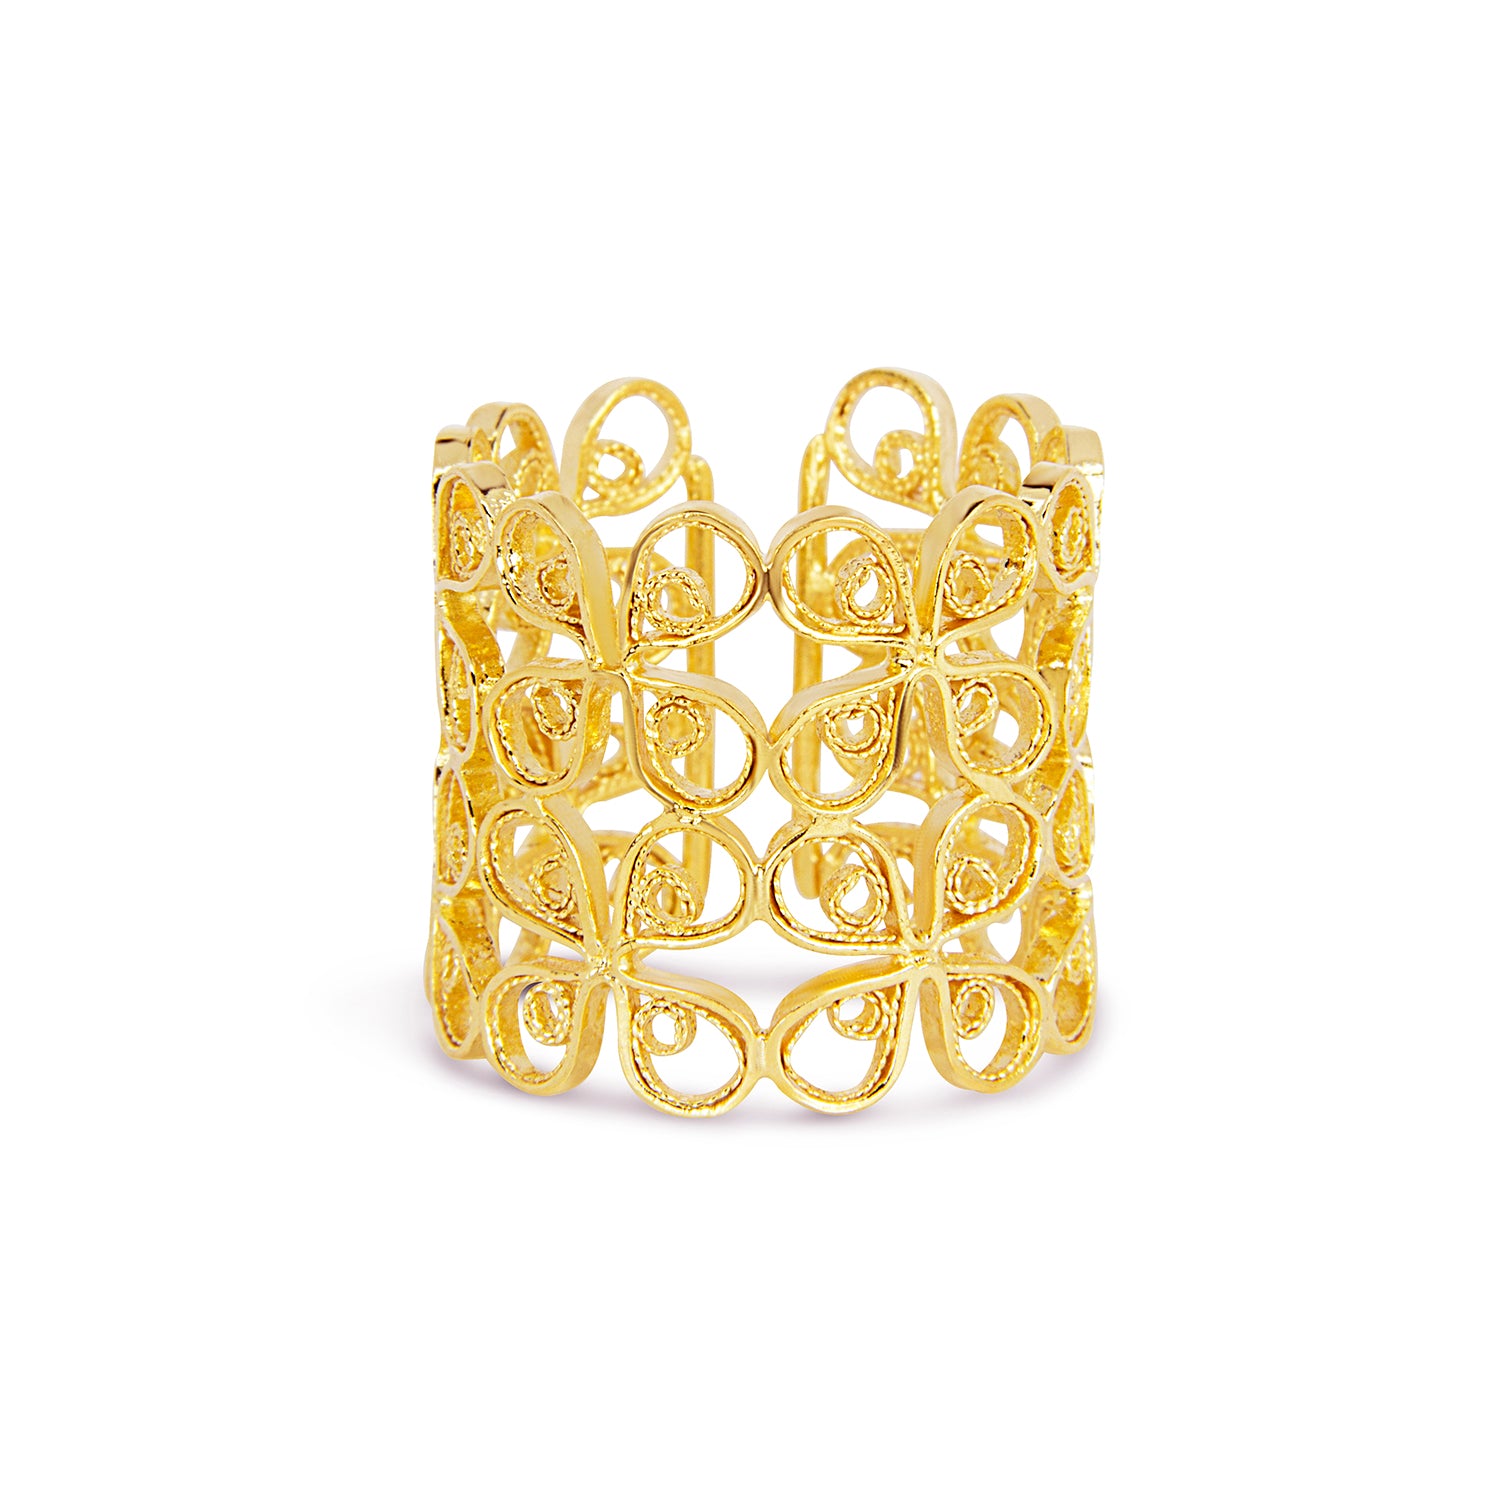 Filigree Double Clover Ring. Yellow Gold